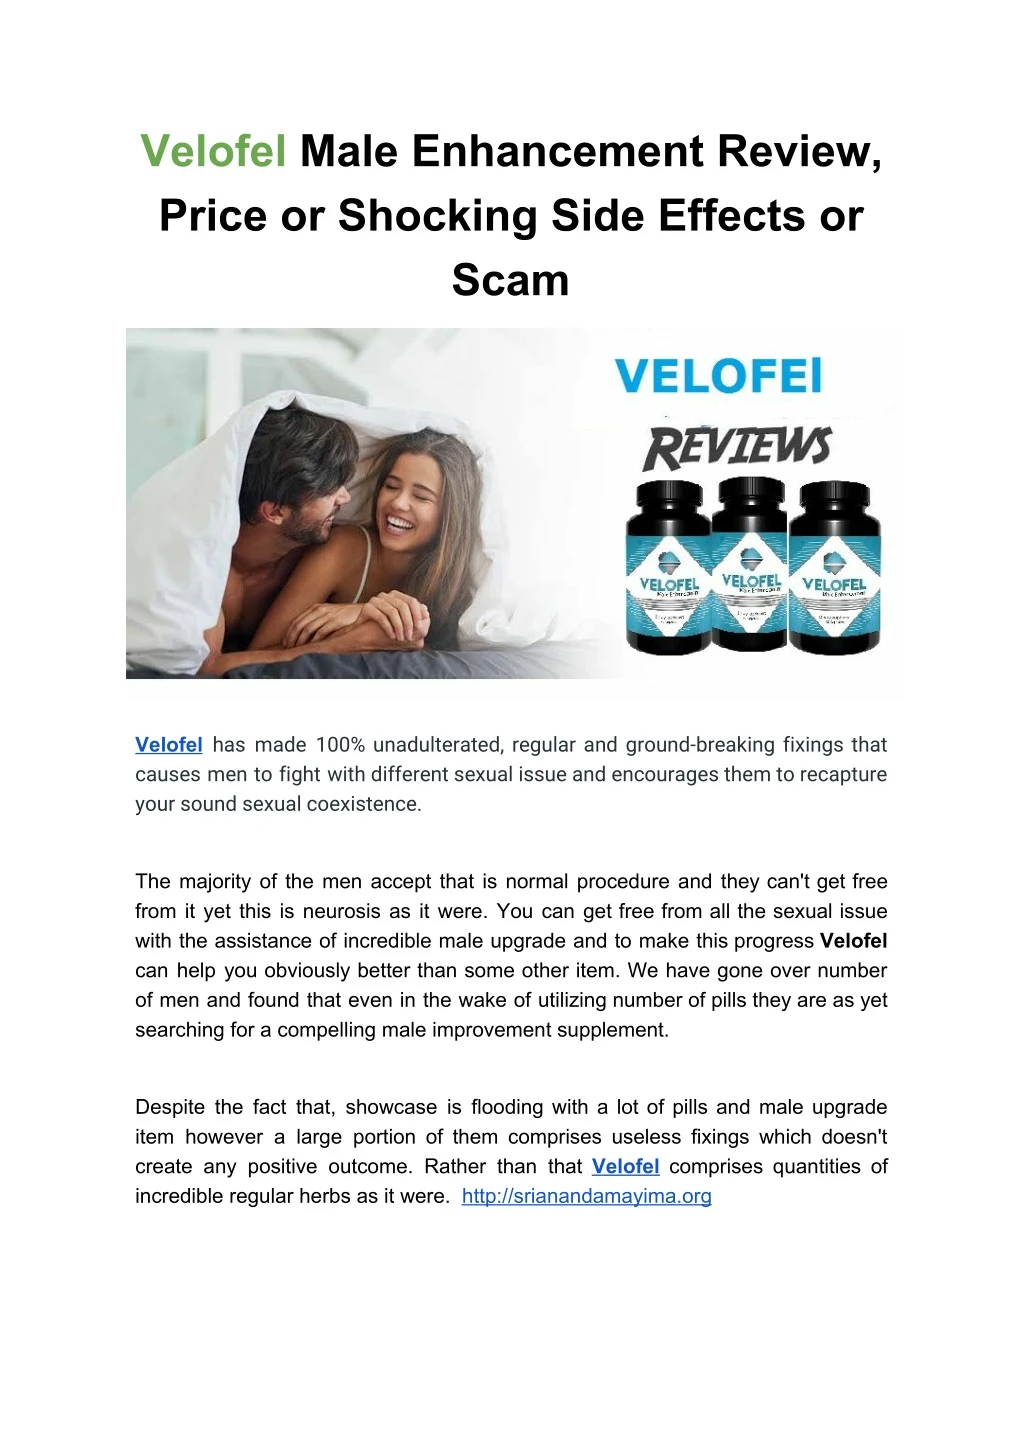 velofel male enhancement review price or shocking